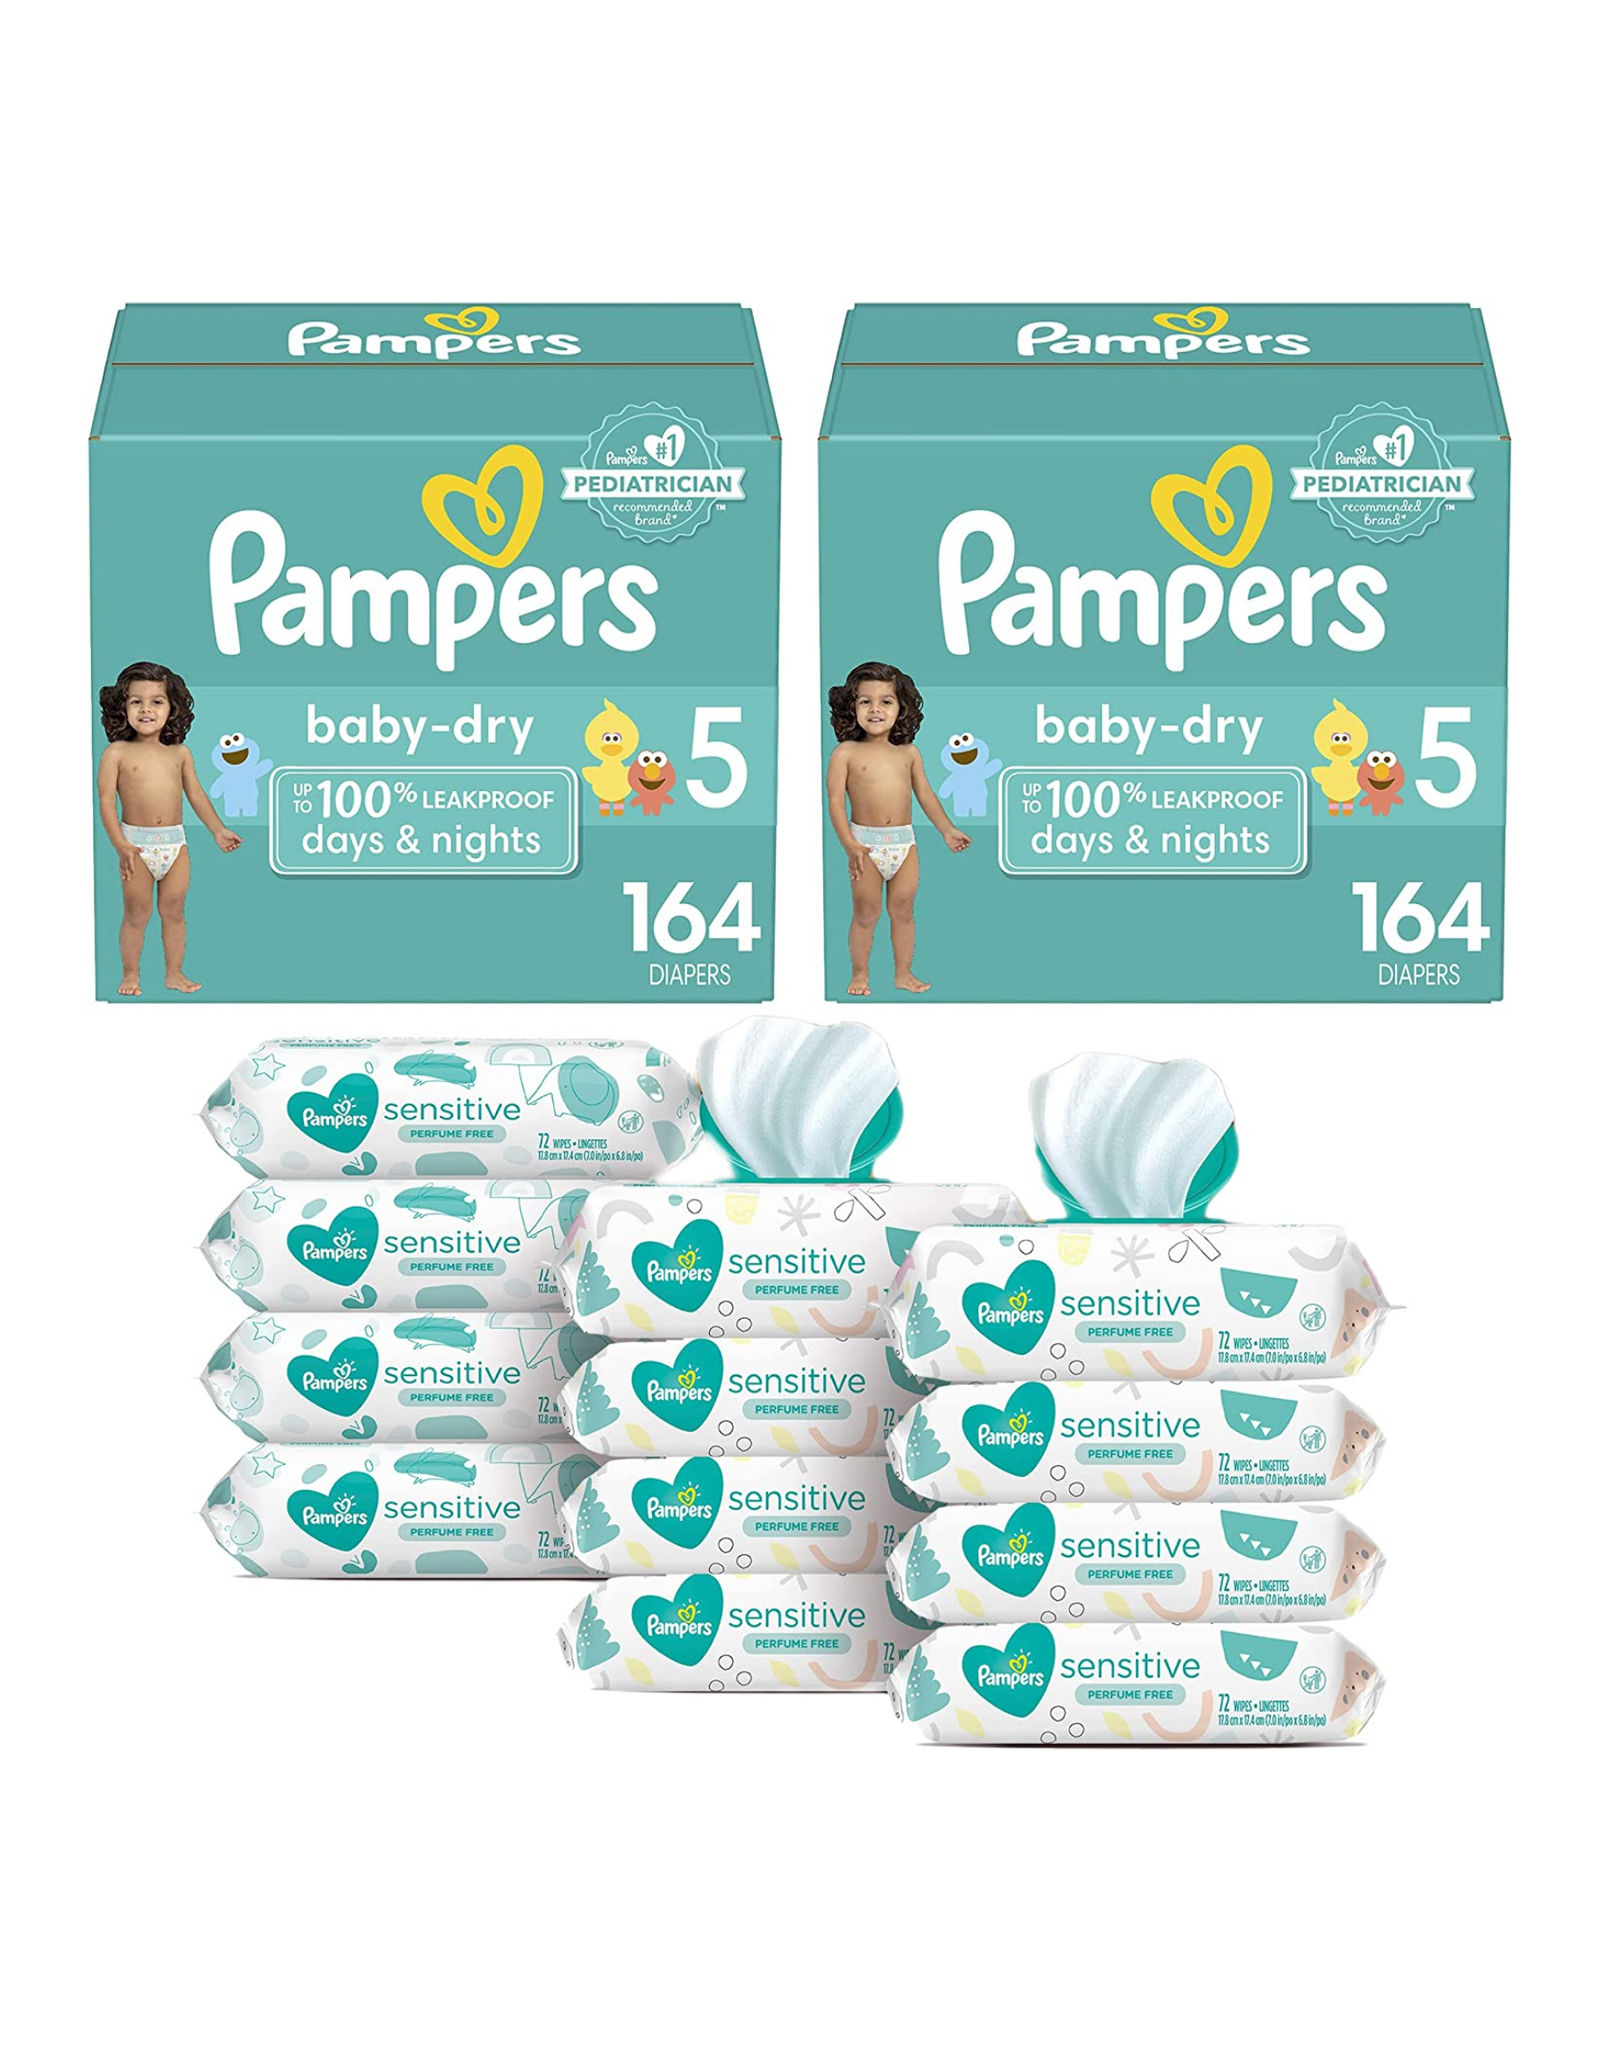 Pampers Baby Dry Disposable Baby Diapers Size 5, 164 Ct (2 Pack) with Sensitive Water Based Baby Wipes, 18 Pop-Top Packs + 4 Refills, 864 total wipes (12 Packs)